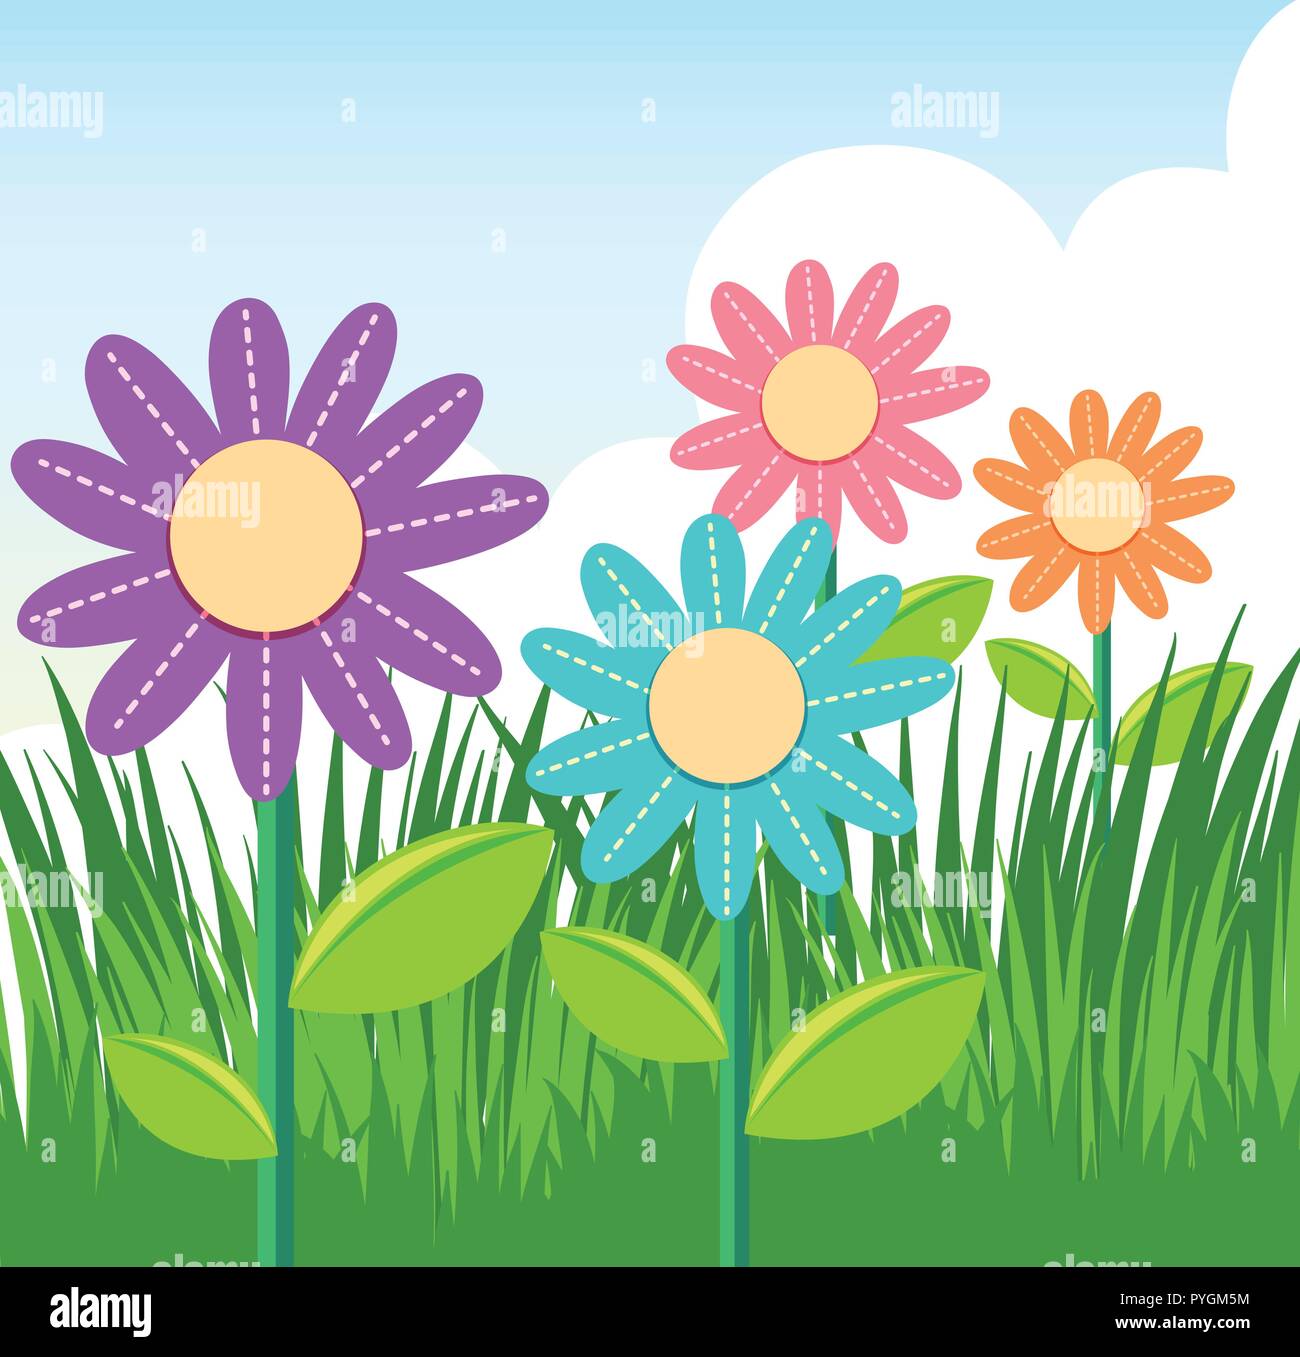 Scene with colorful flowers in garden illustration Stock Vector ...